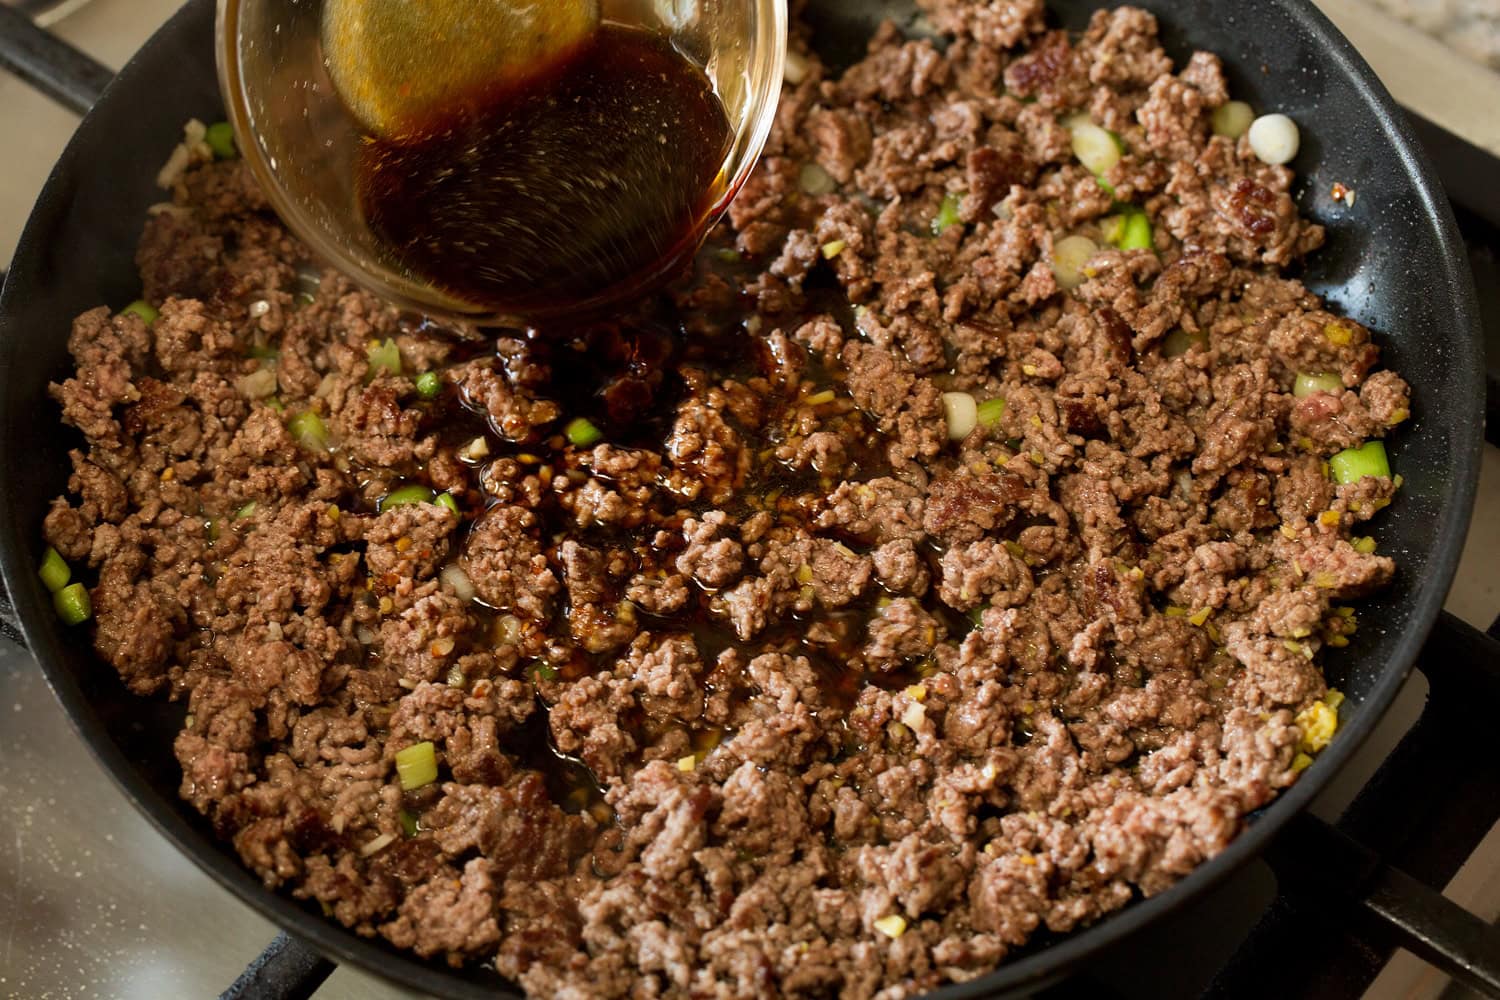 Crumbled browned beef with soy sauce mixture being added.